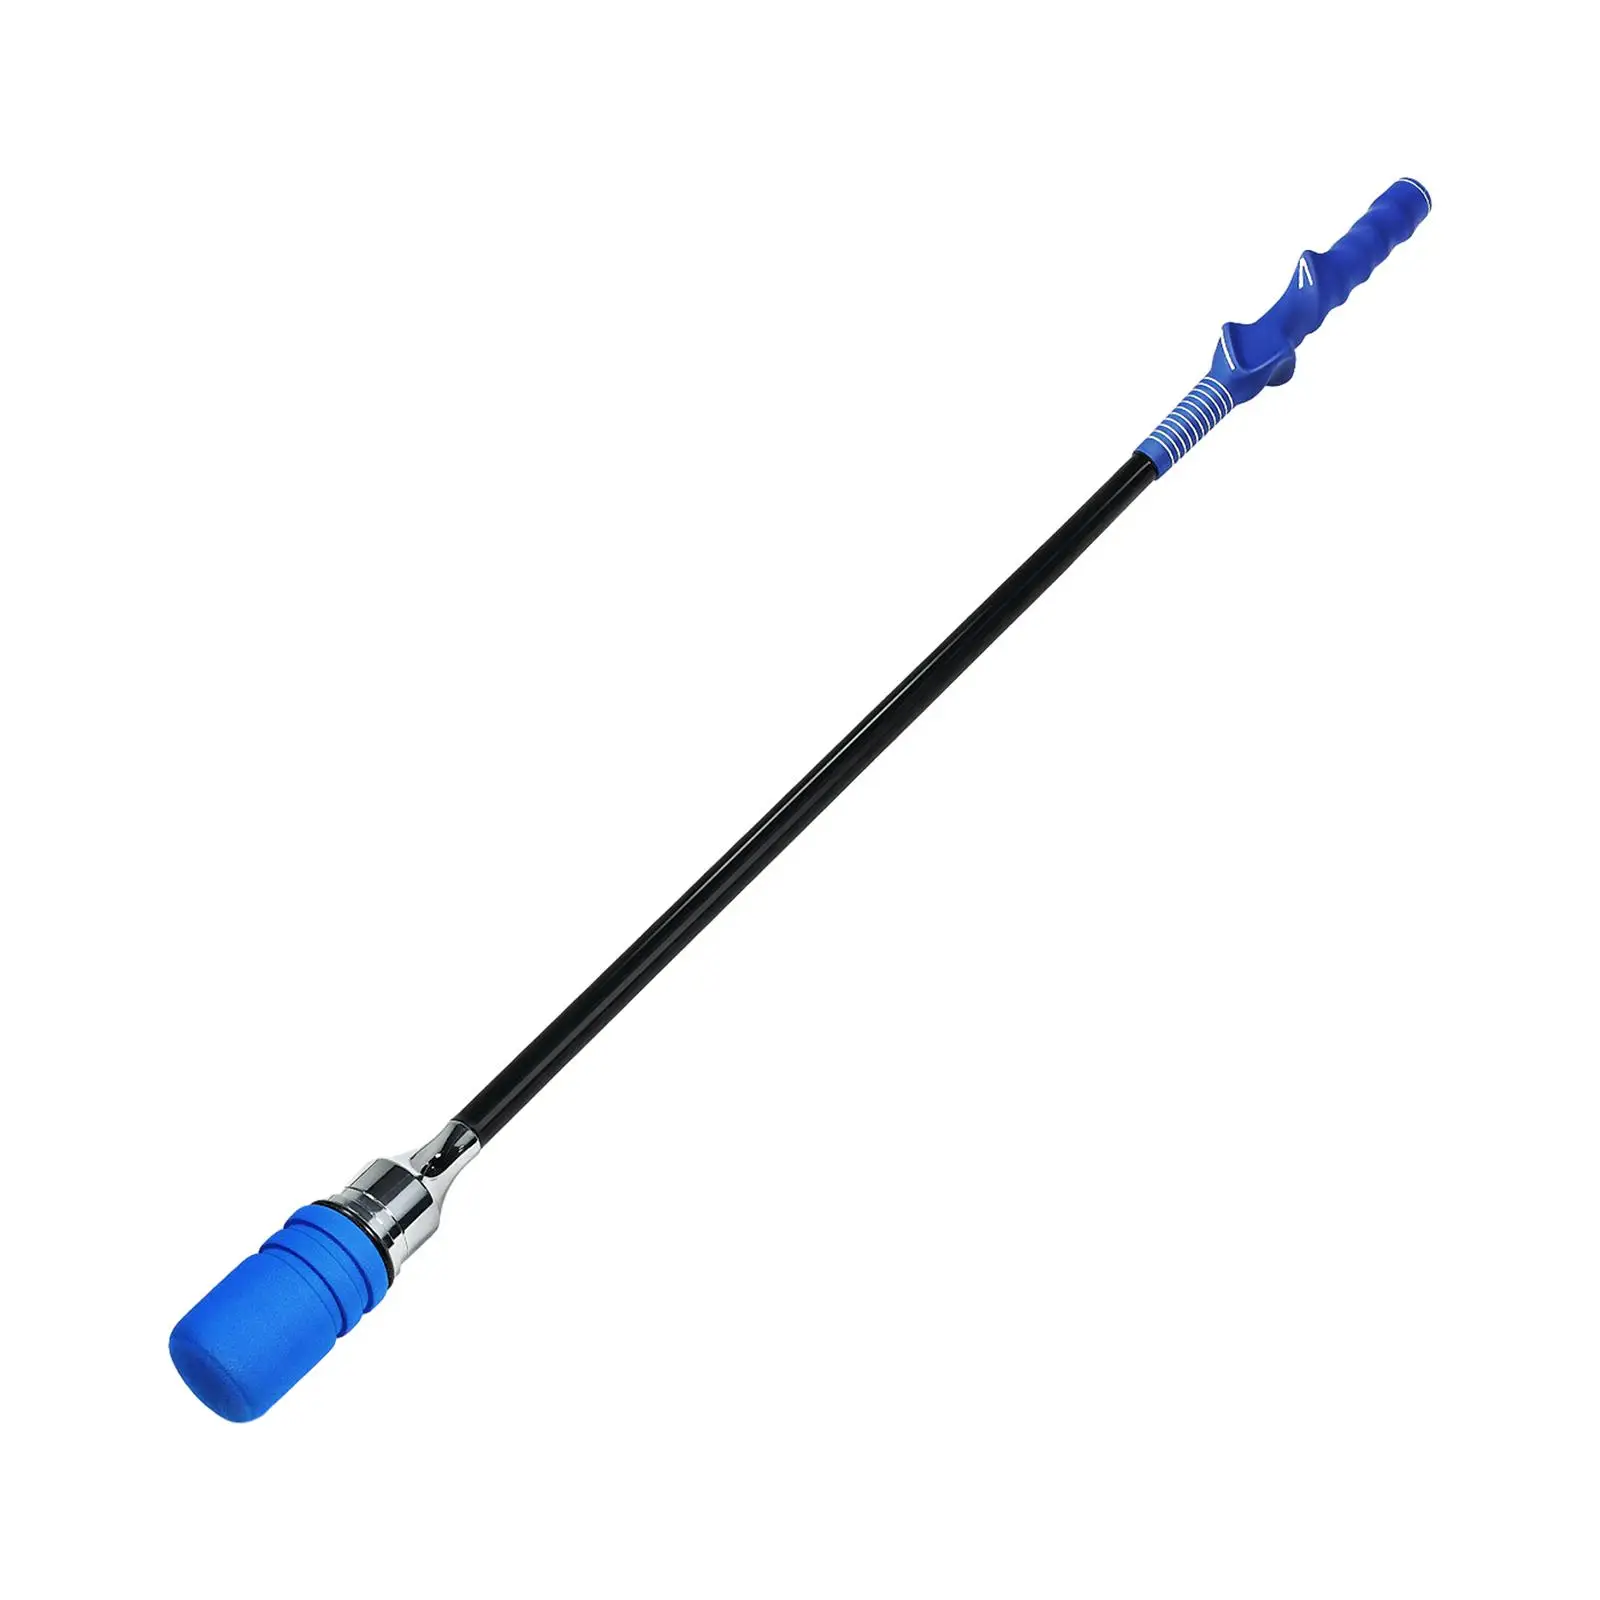 Golf Swing Trainer Golf Training Aid, Warm up Rod Golf Practice for Improved